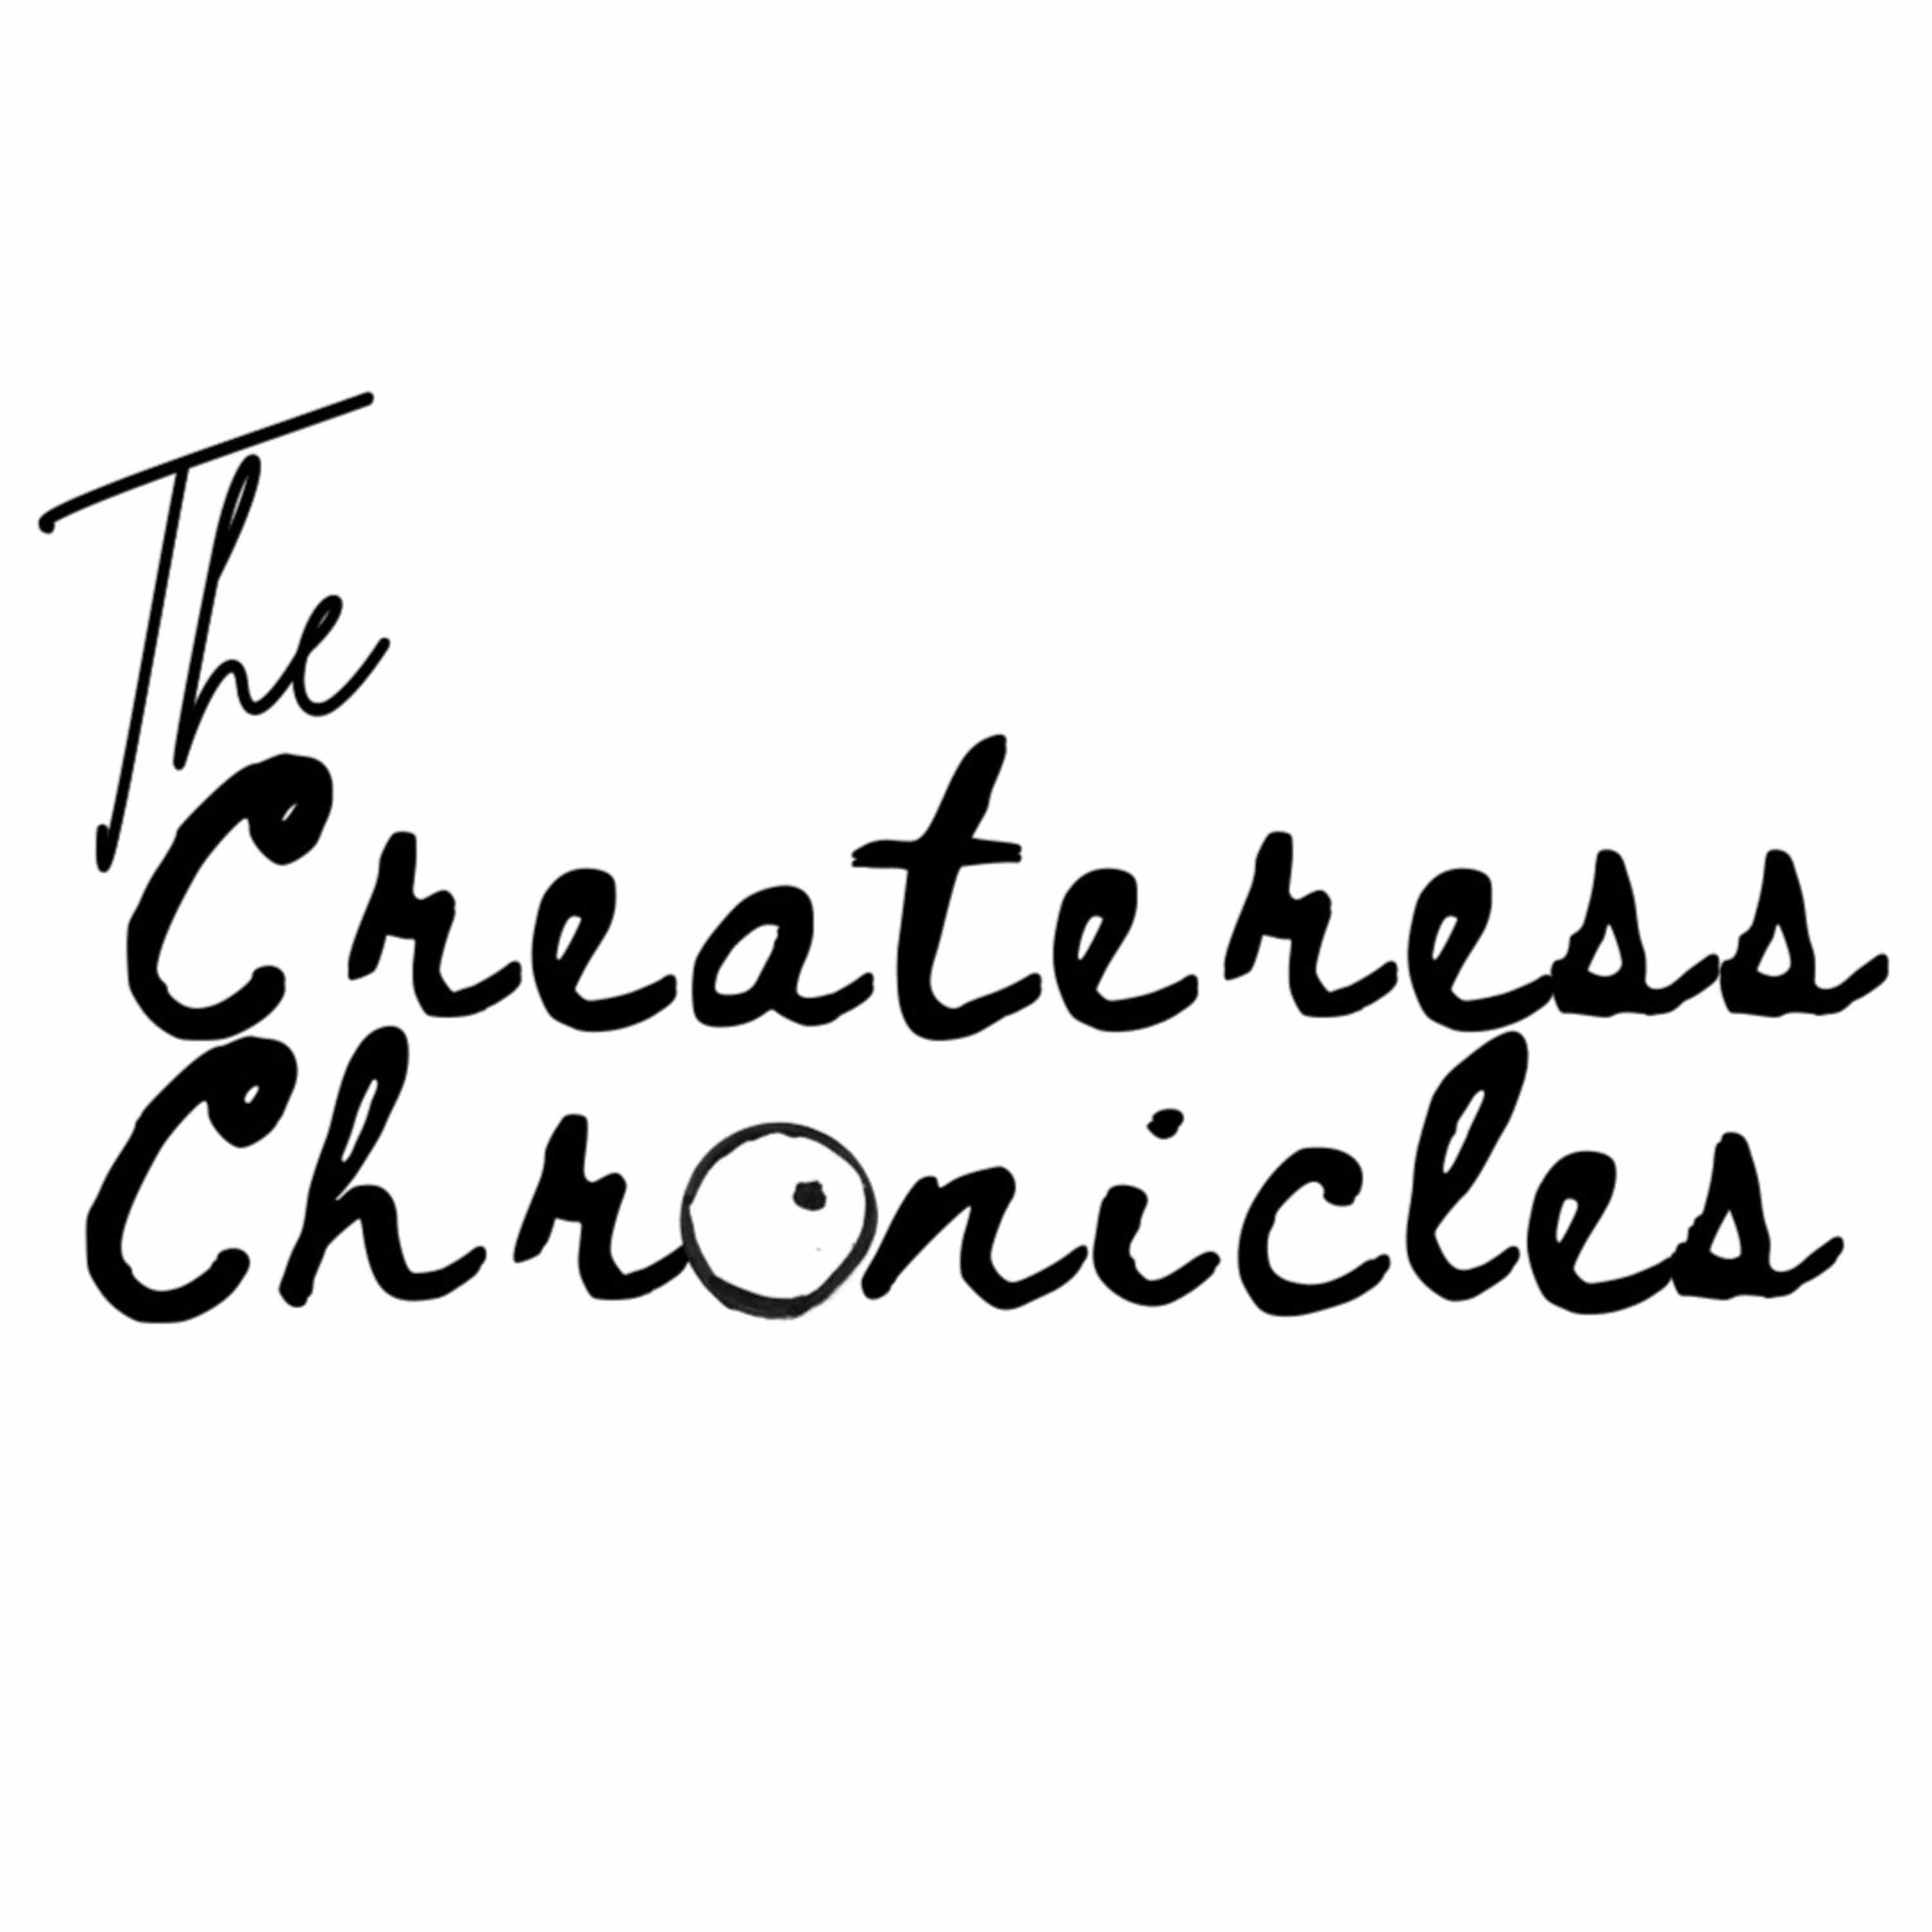 The Createress Chronicles